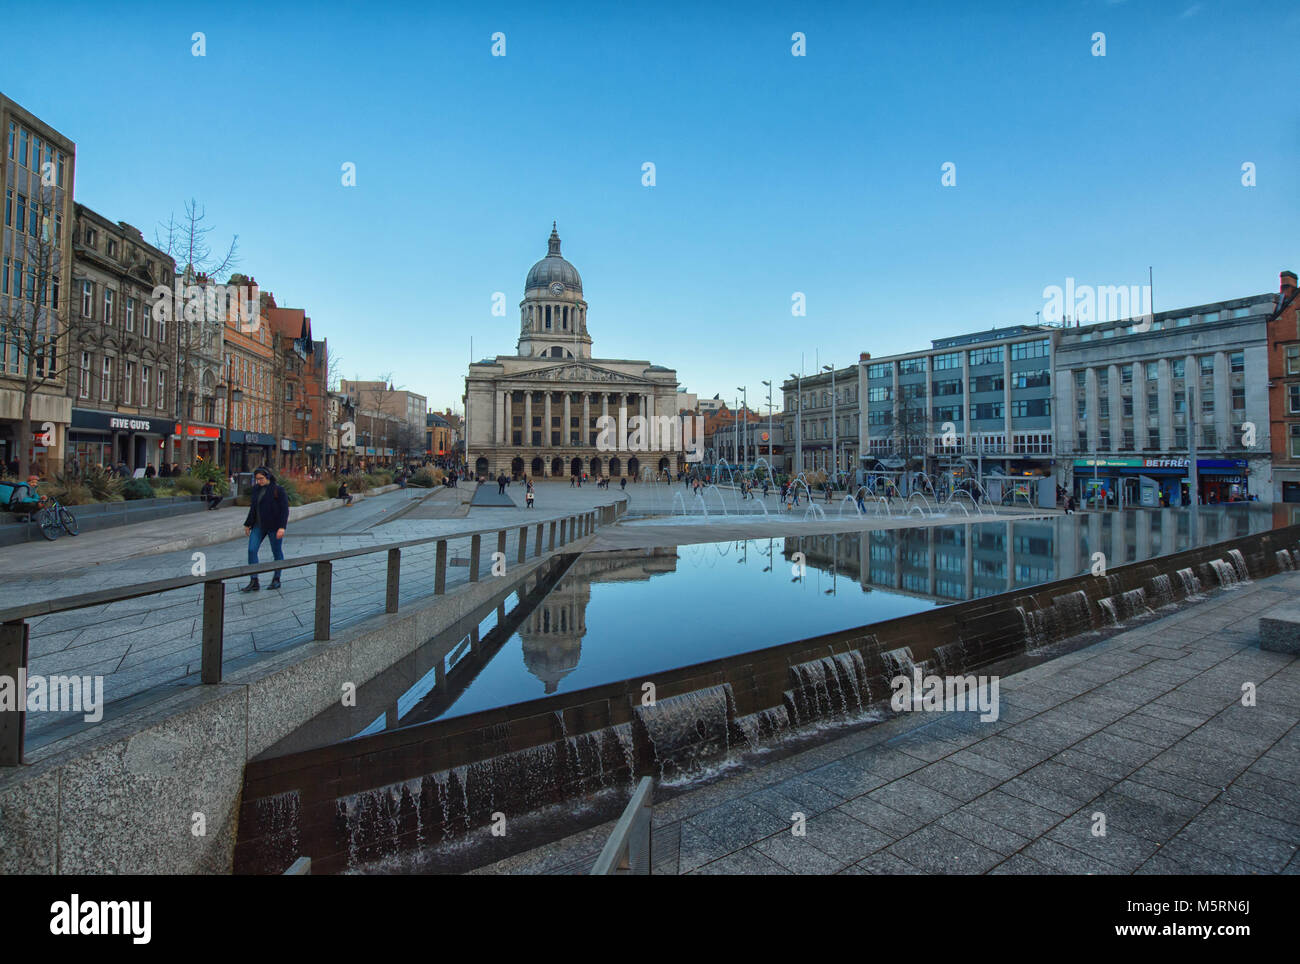 The main Market Square, Nottingham Council House building behind. Stock Photo